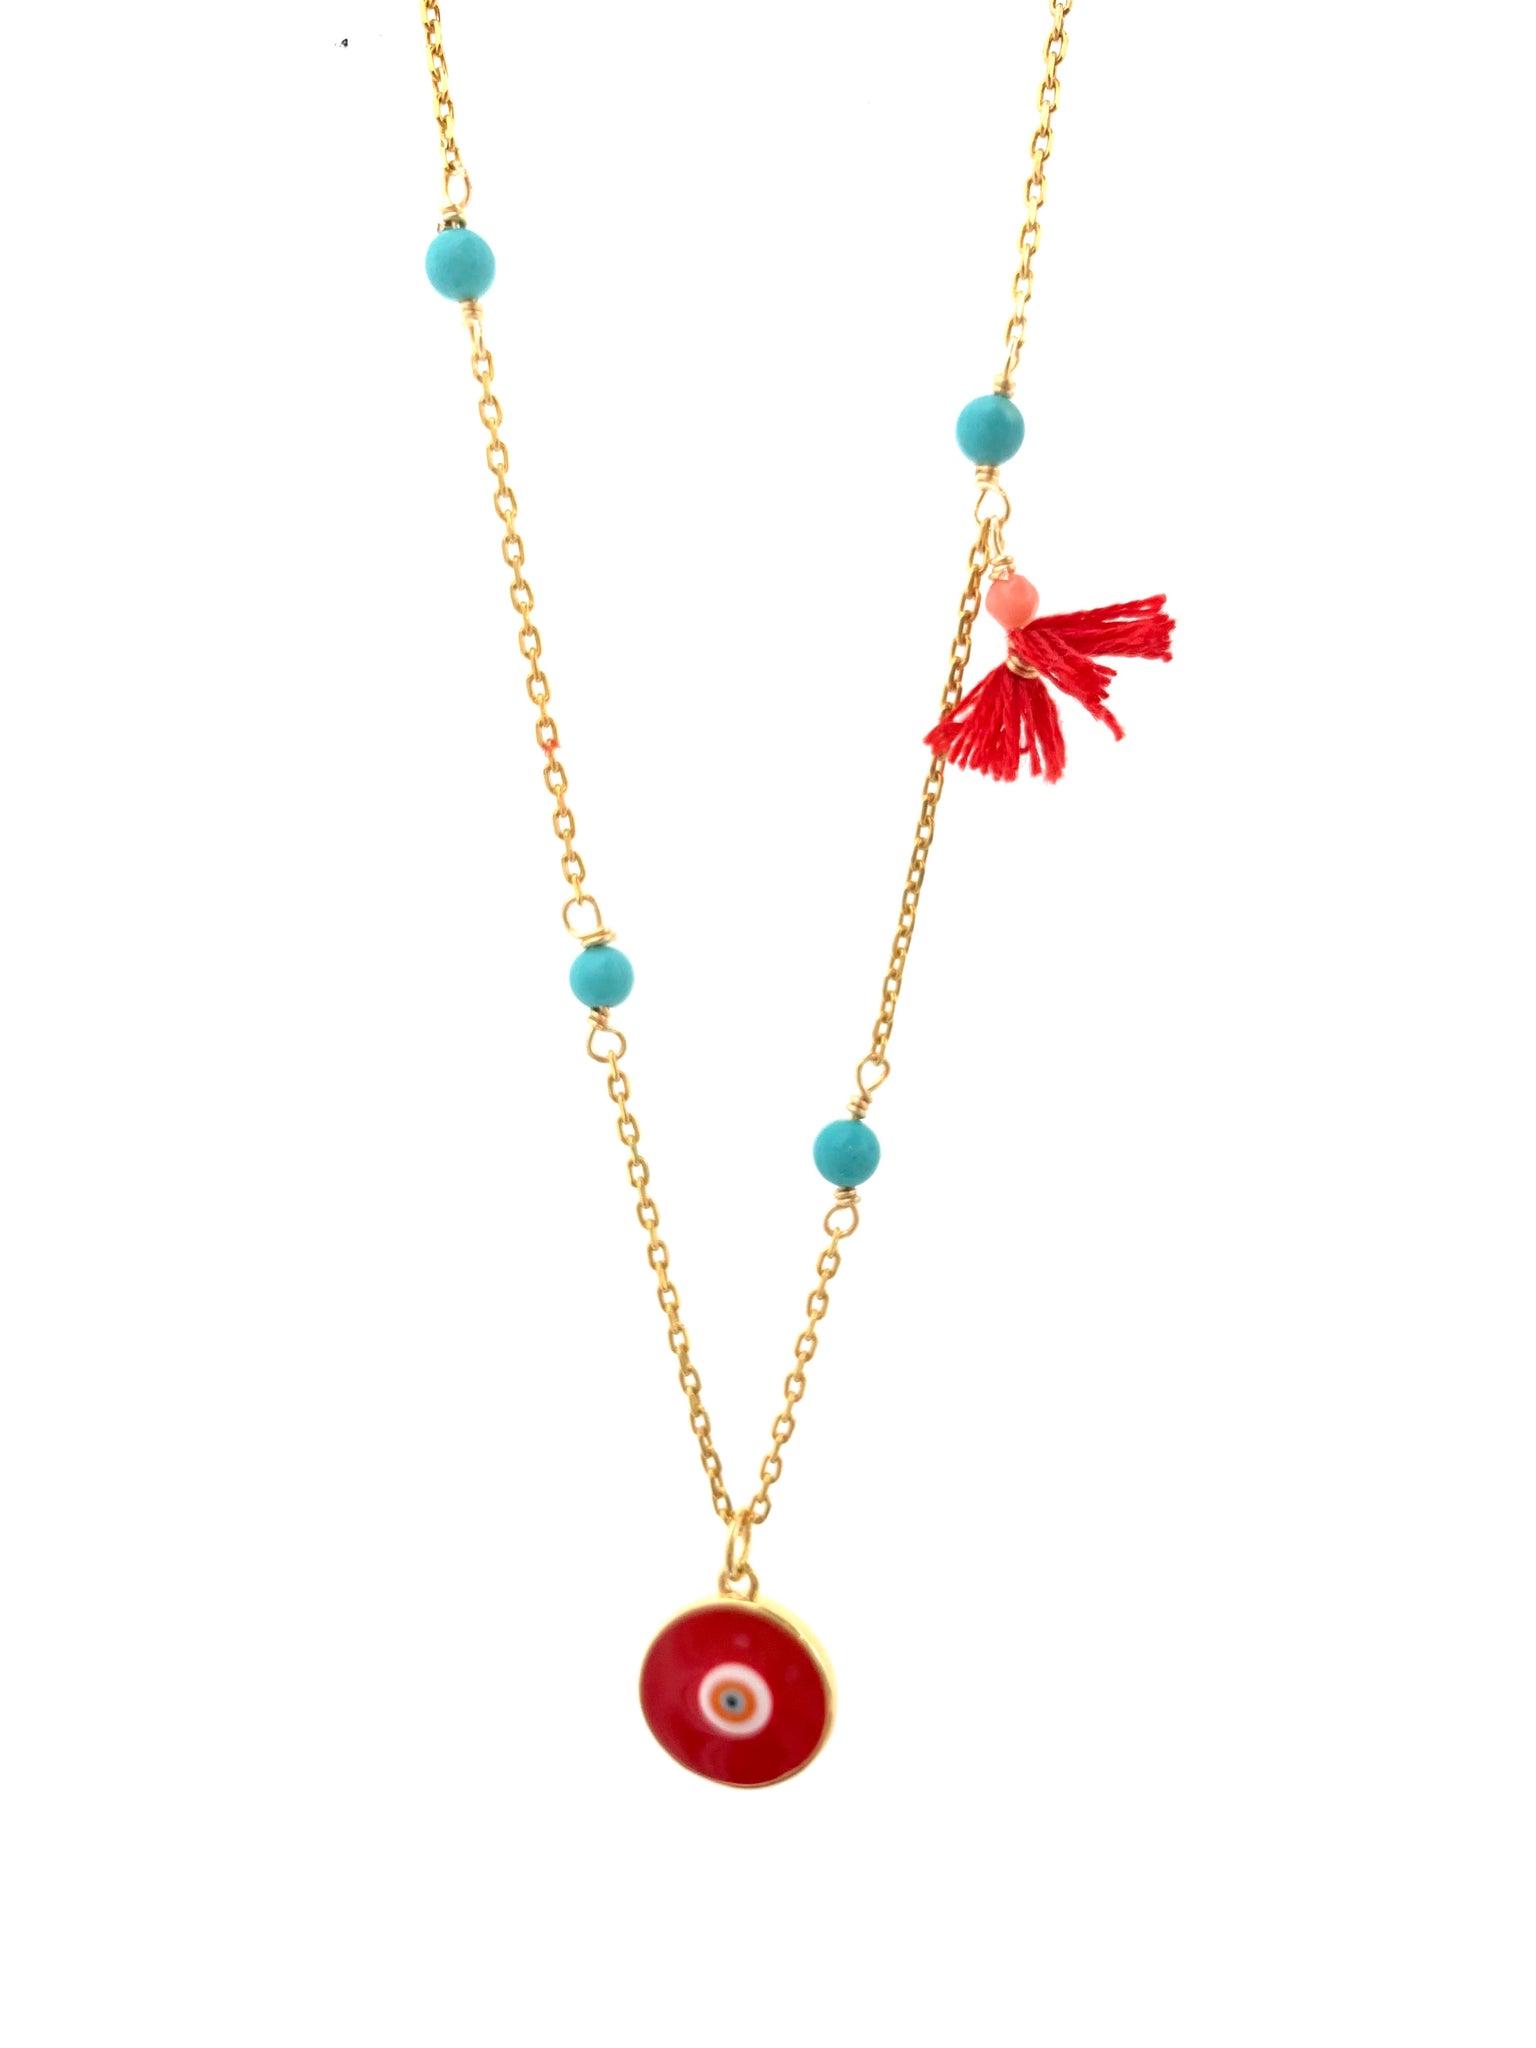 Turquoise stones red evil eye pendant gold plated chain necklace red tassel inamullumani LUMA Qusus awad